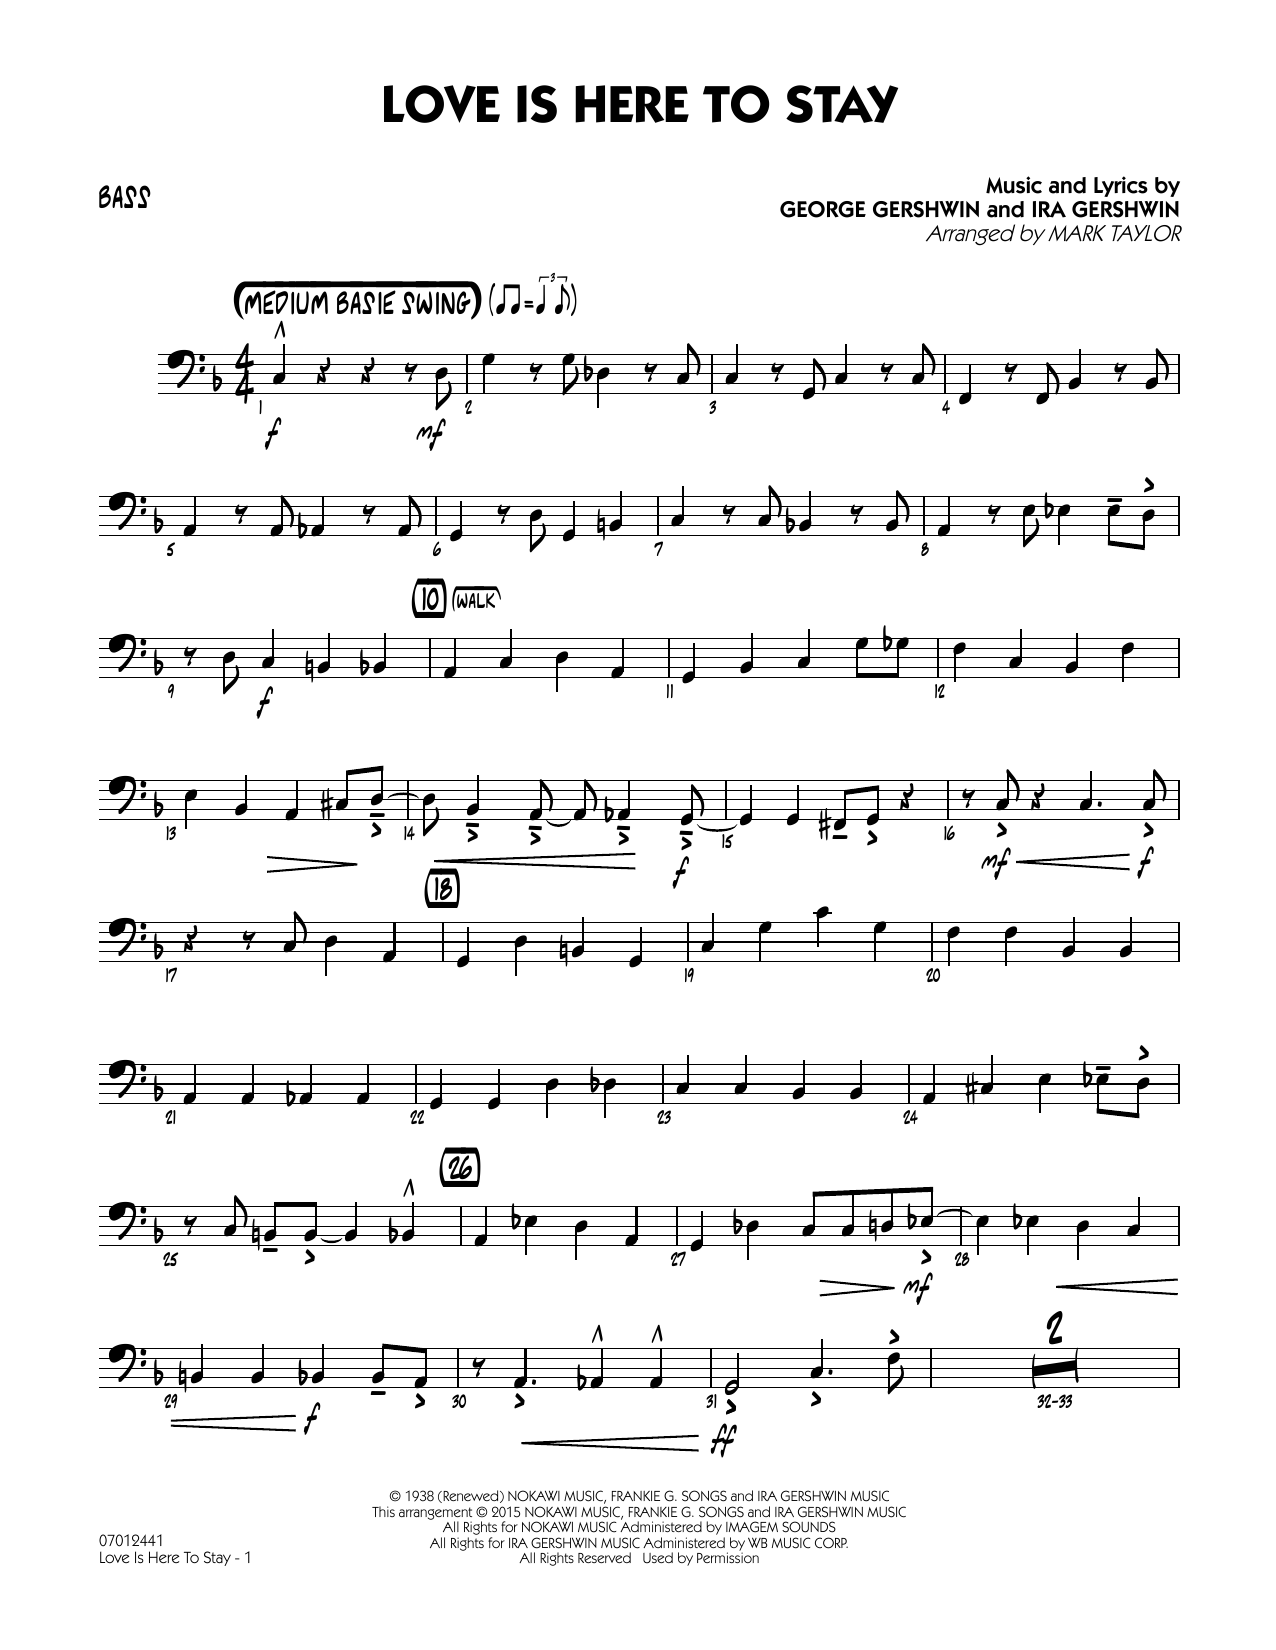 Mark Taylor Love Is Here to Stay - Bass sheet music notes and chords. Download Printable PDF.